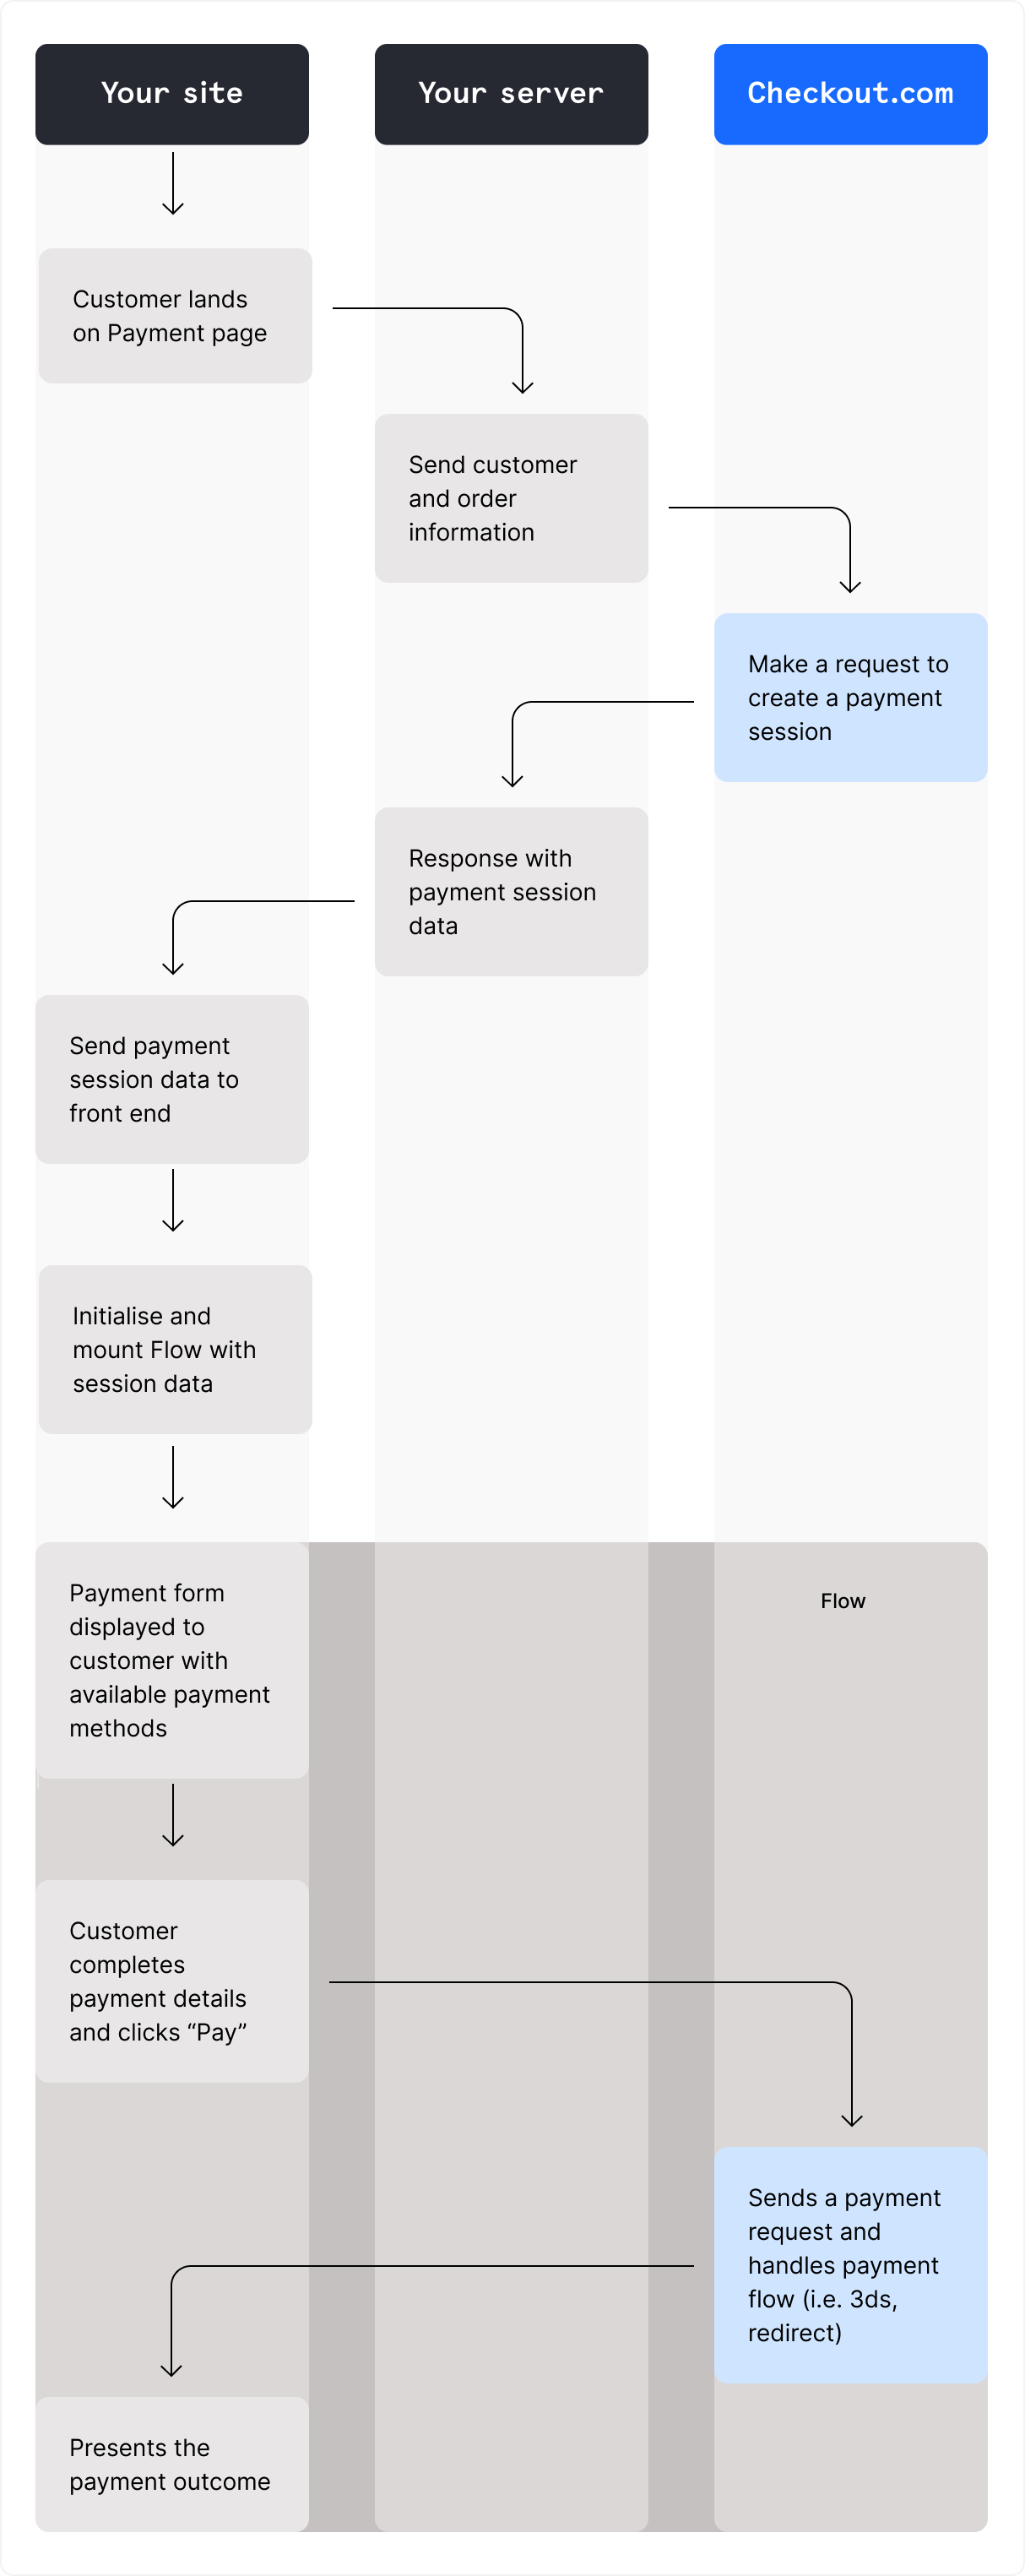 Diagram of the payment process when using Flow, showing the communication between your site, your server, and the Checkout.com server.